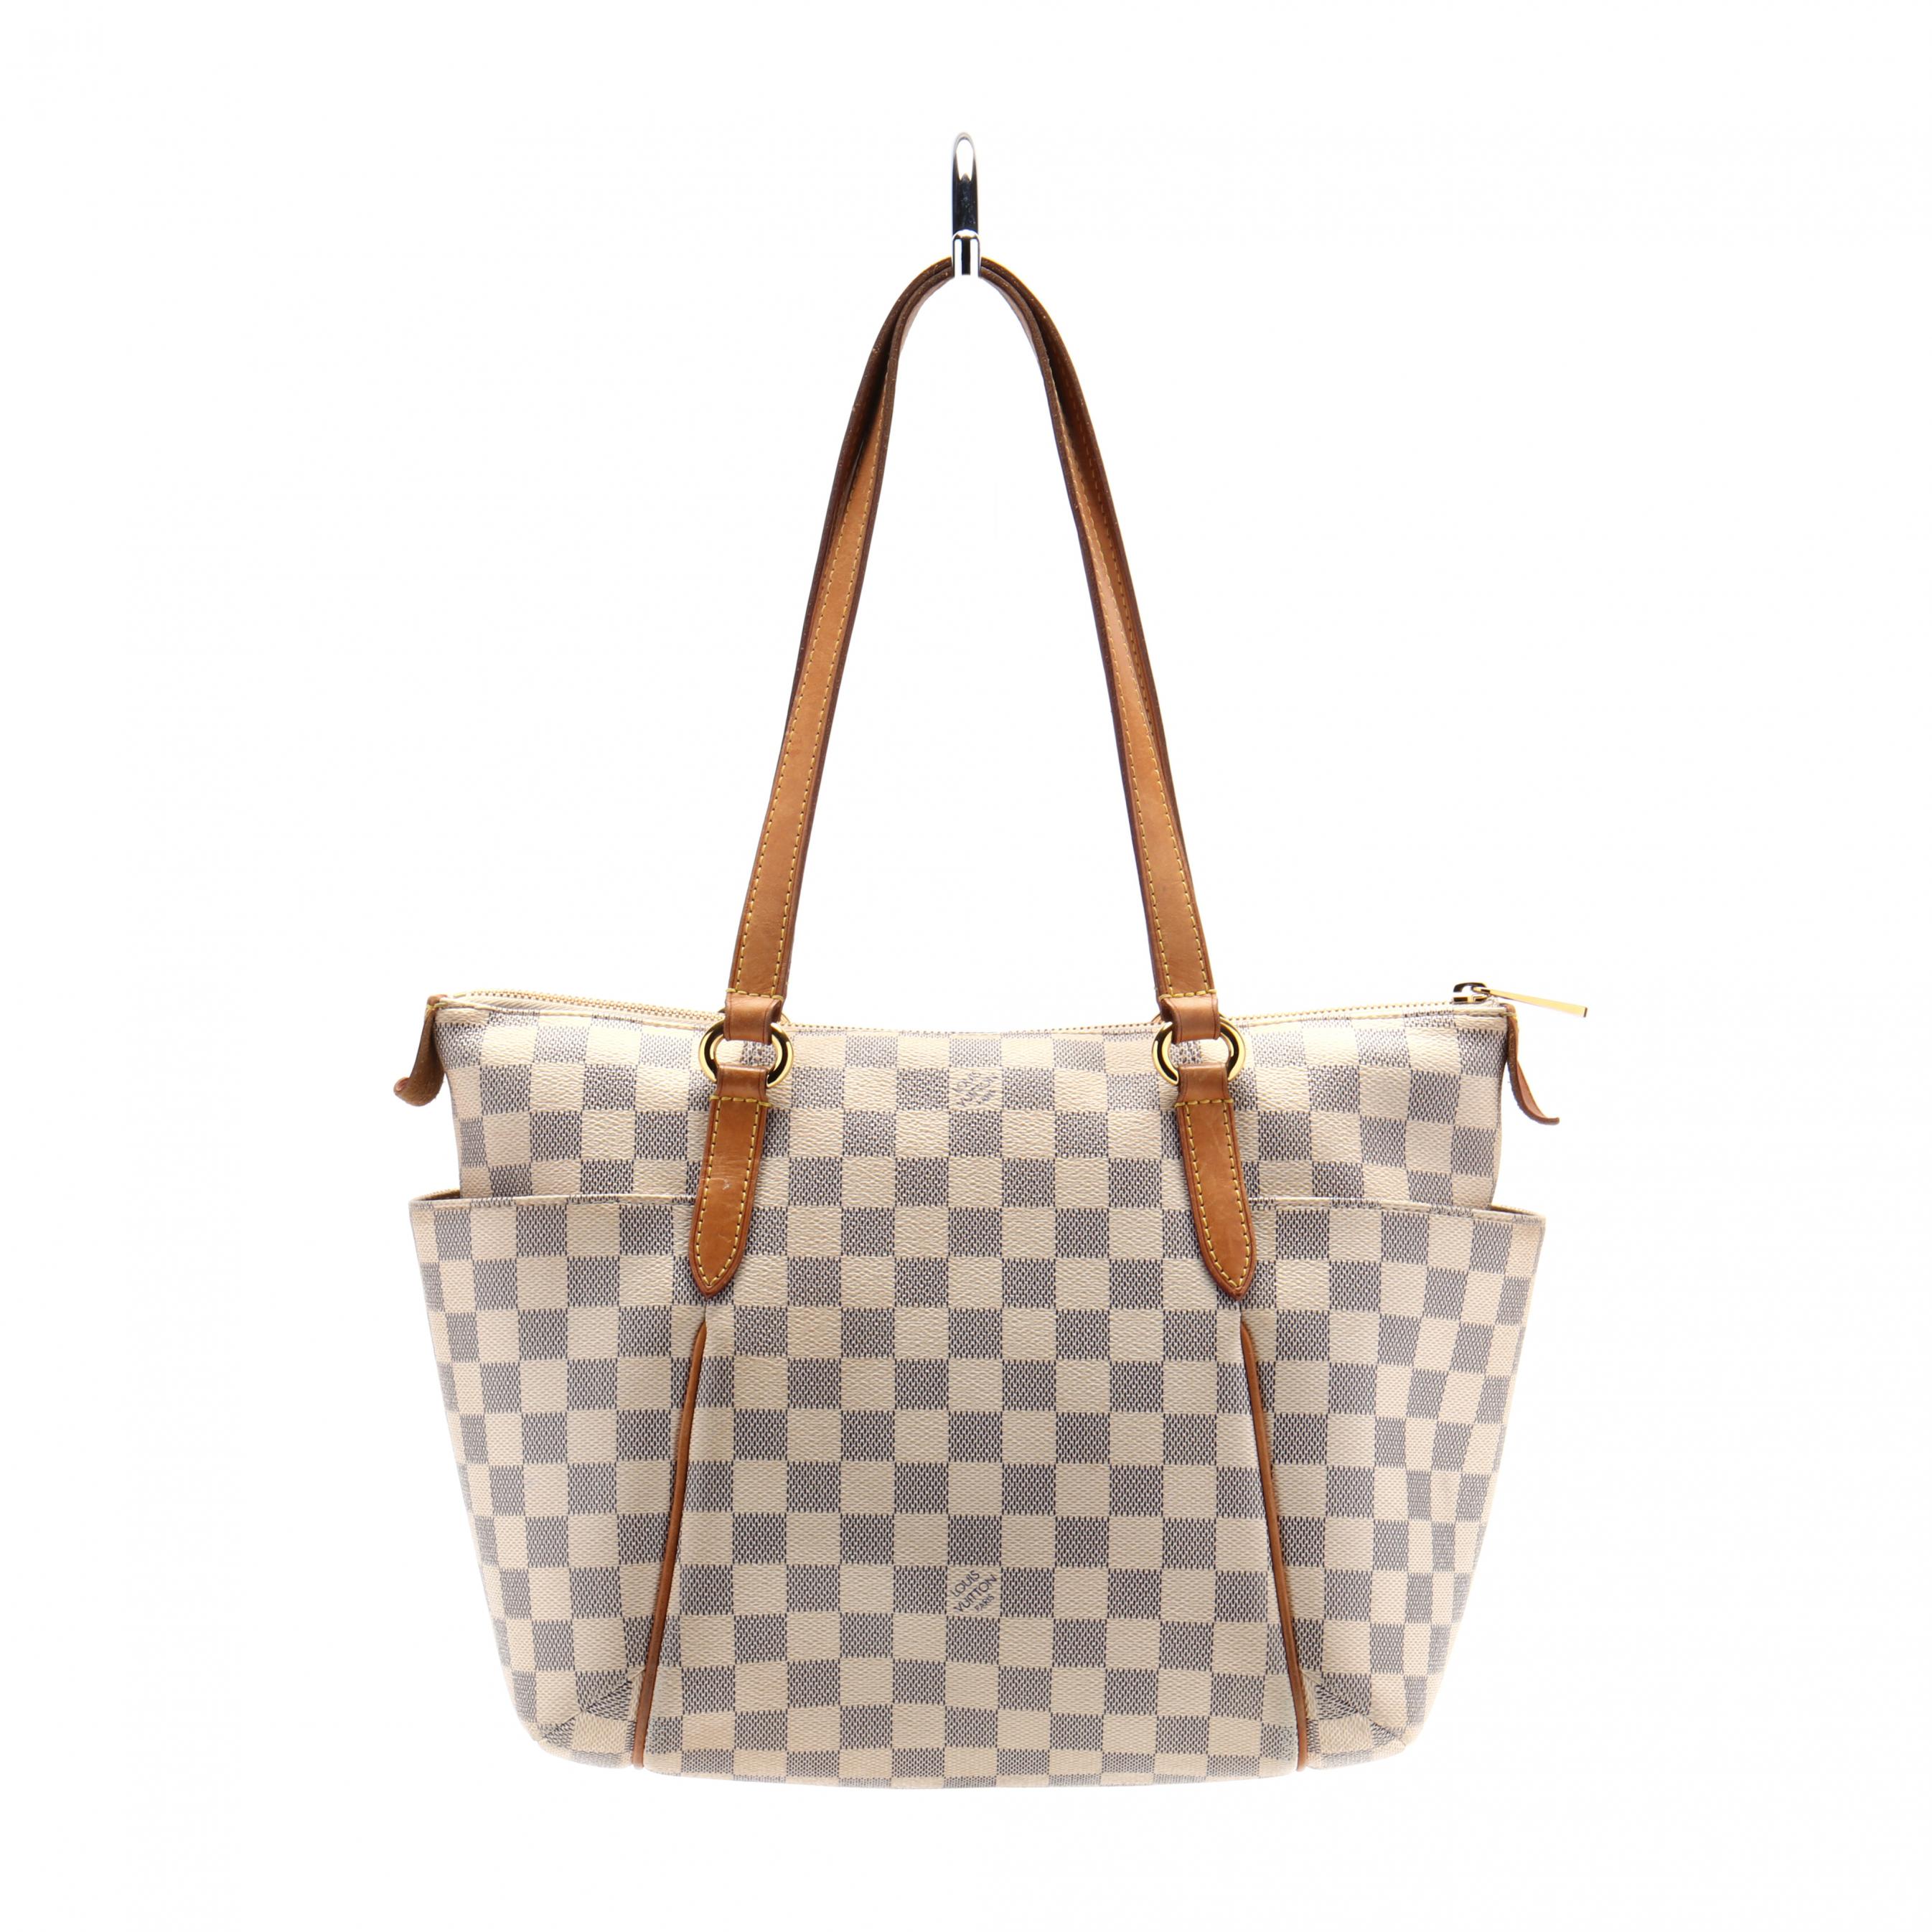 Sold at Auction: Louis Vuitton - Totally Tote Bag - Shoulder Strap -  Leather Monogram - Medium